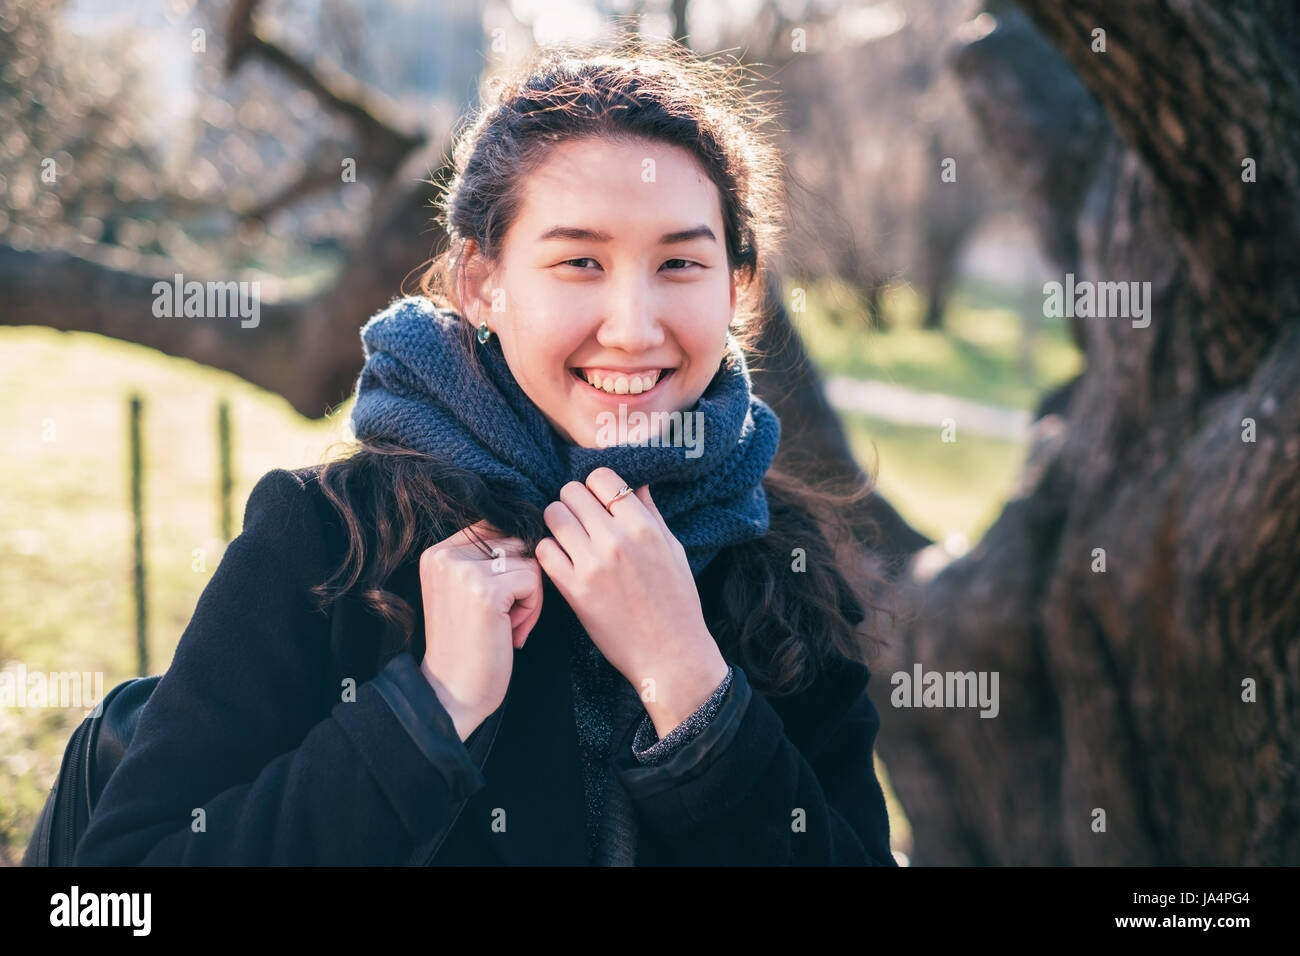 Portrait of an Asian happy girl. She looks at the camera and smiles, wrapped up in a scarf. Stock Photo